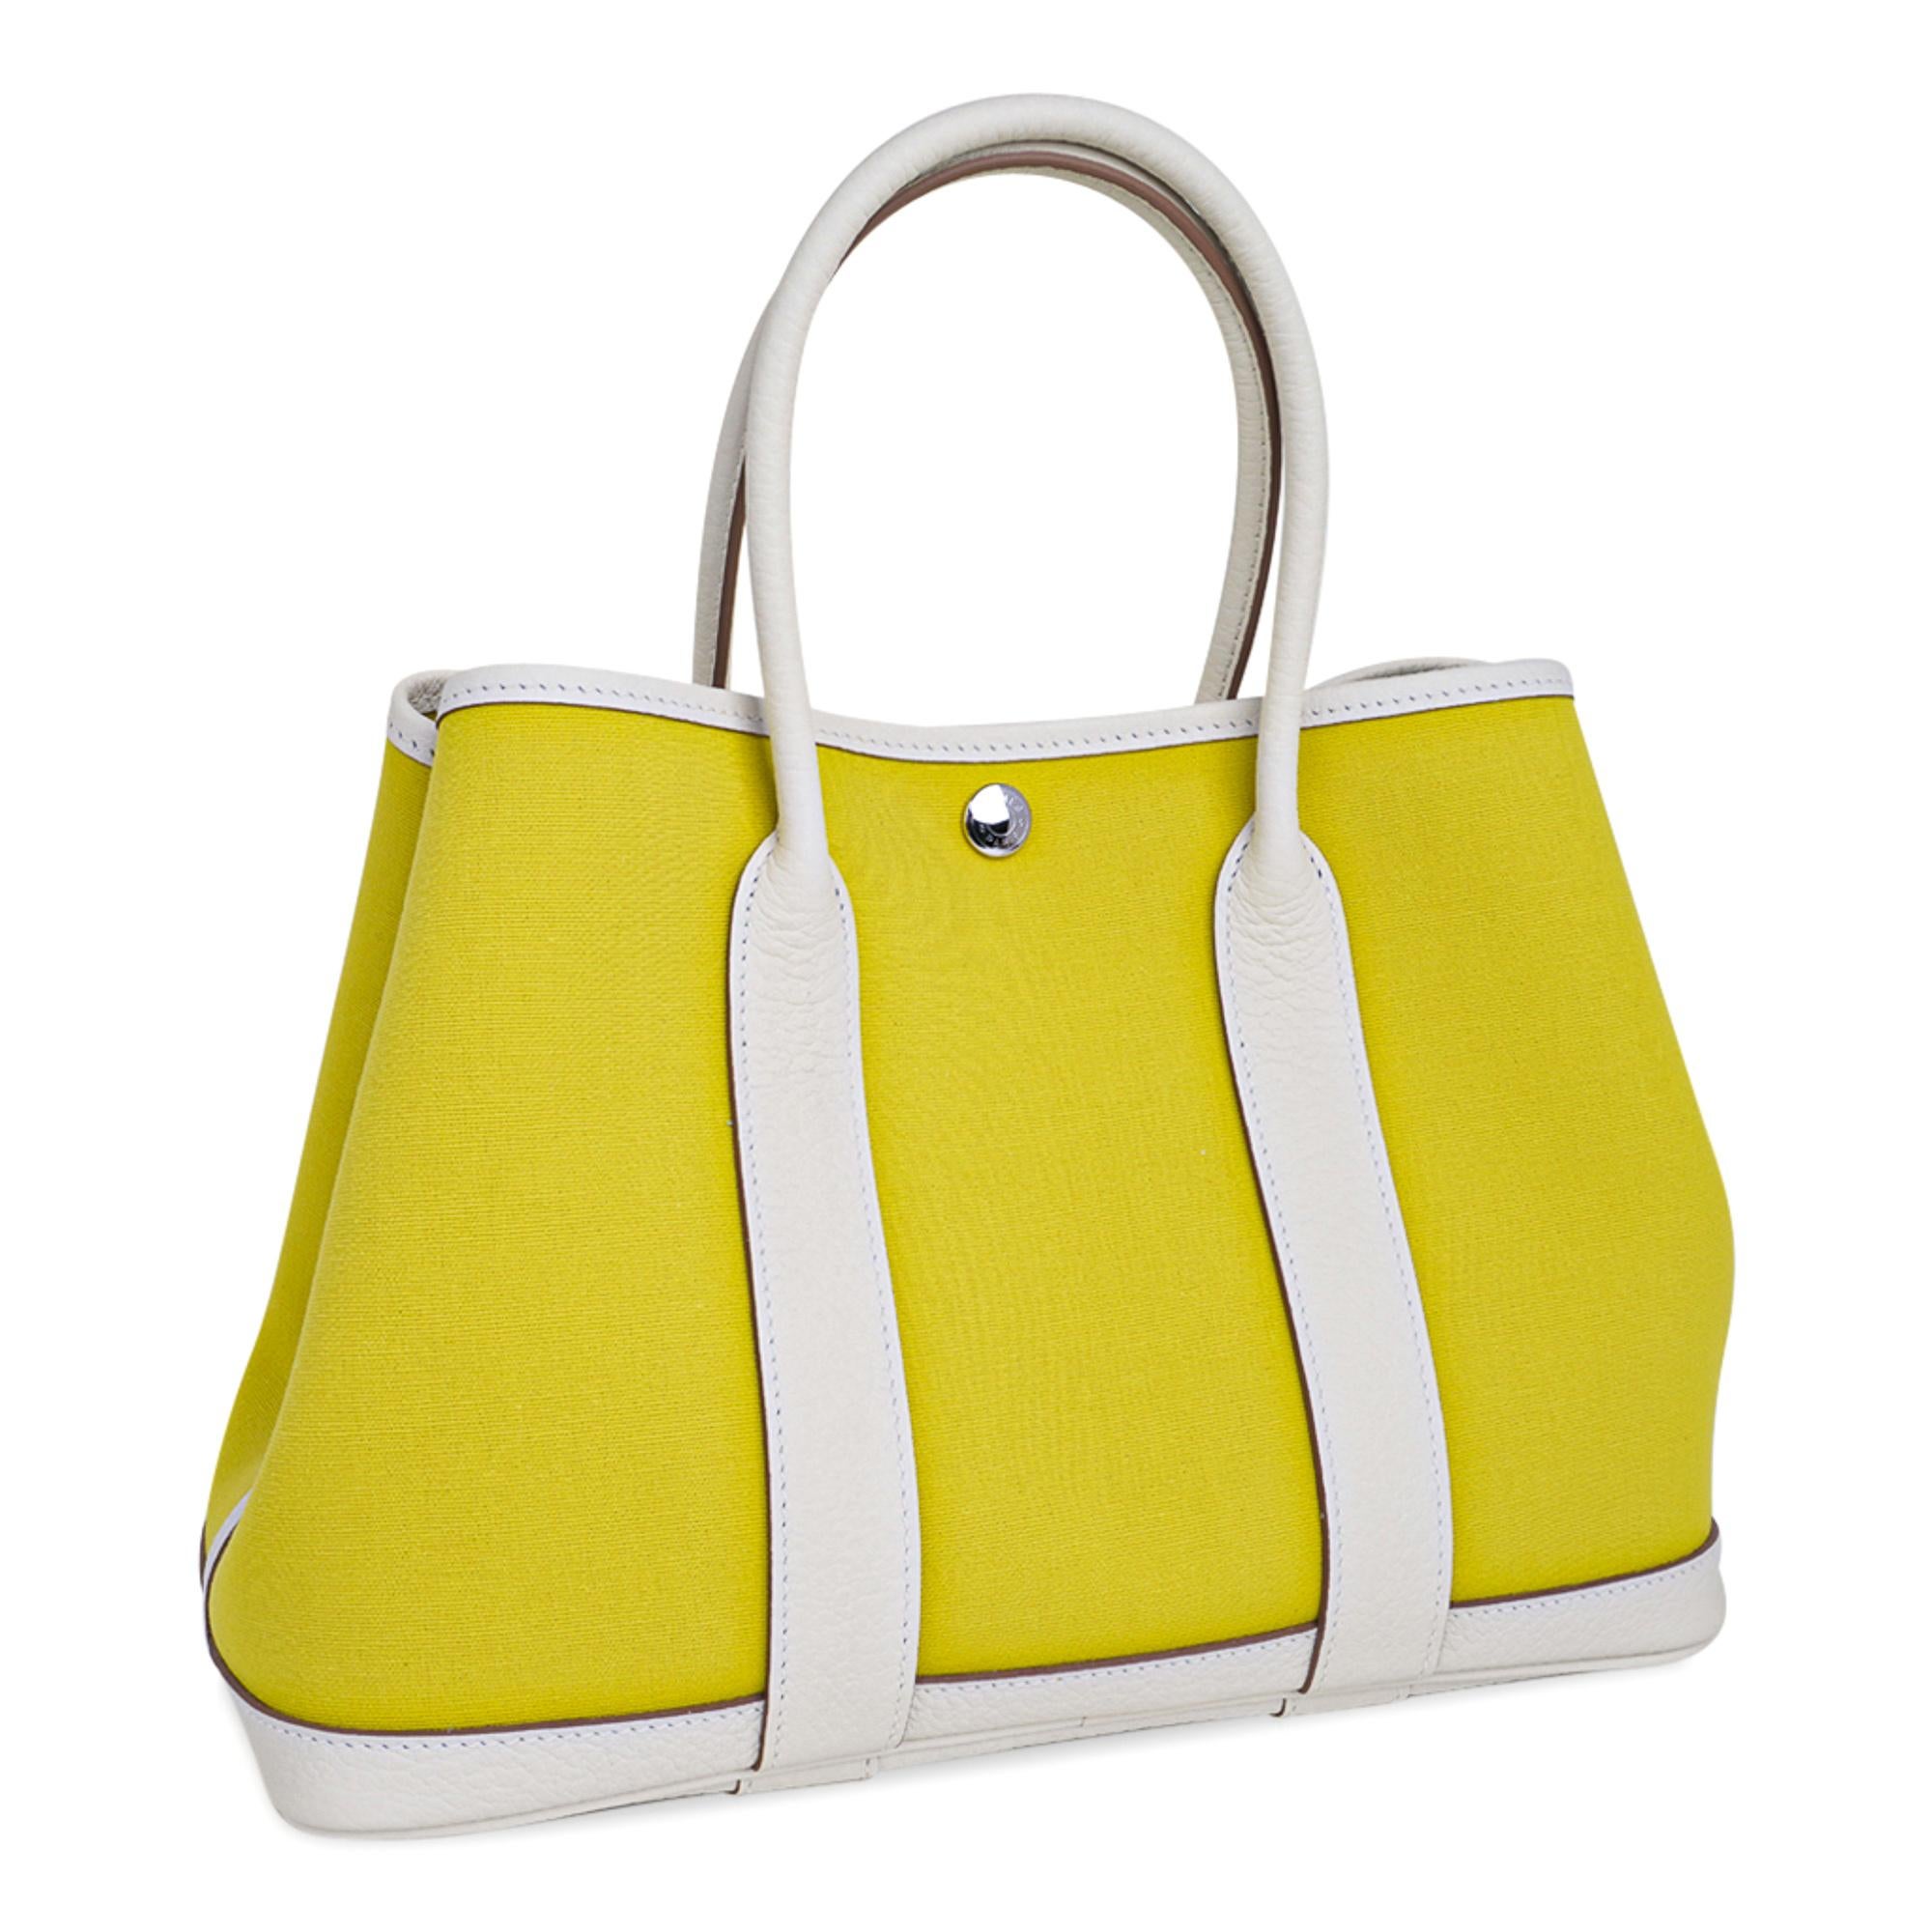 Guaranteed authentic Hermes Garden Party 30 bag featured in Lime and White Toile Officier and Vache Country leather.
This crisp and fresh Garden Party 30 tote bag is the perfect about town tote. 
Durable and strong toile reinforced with the leather